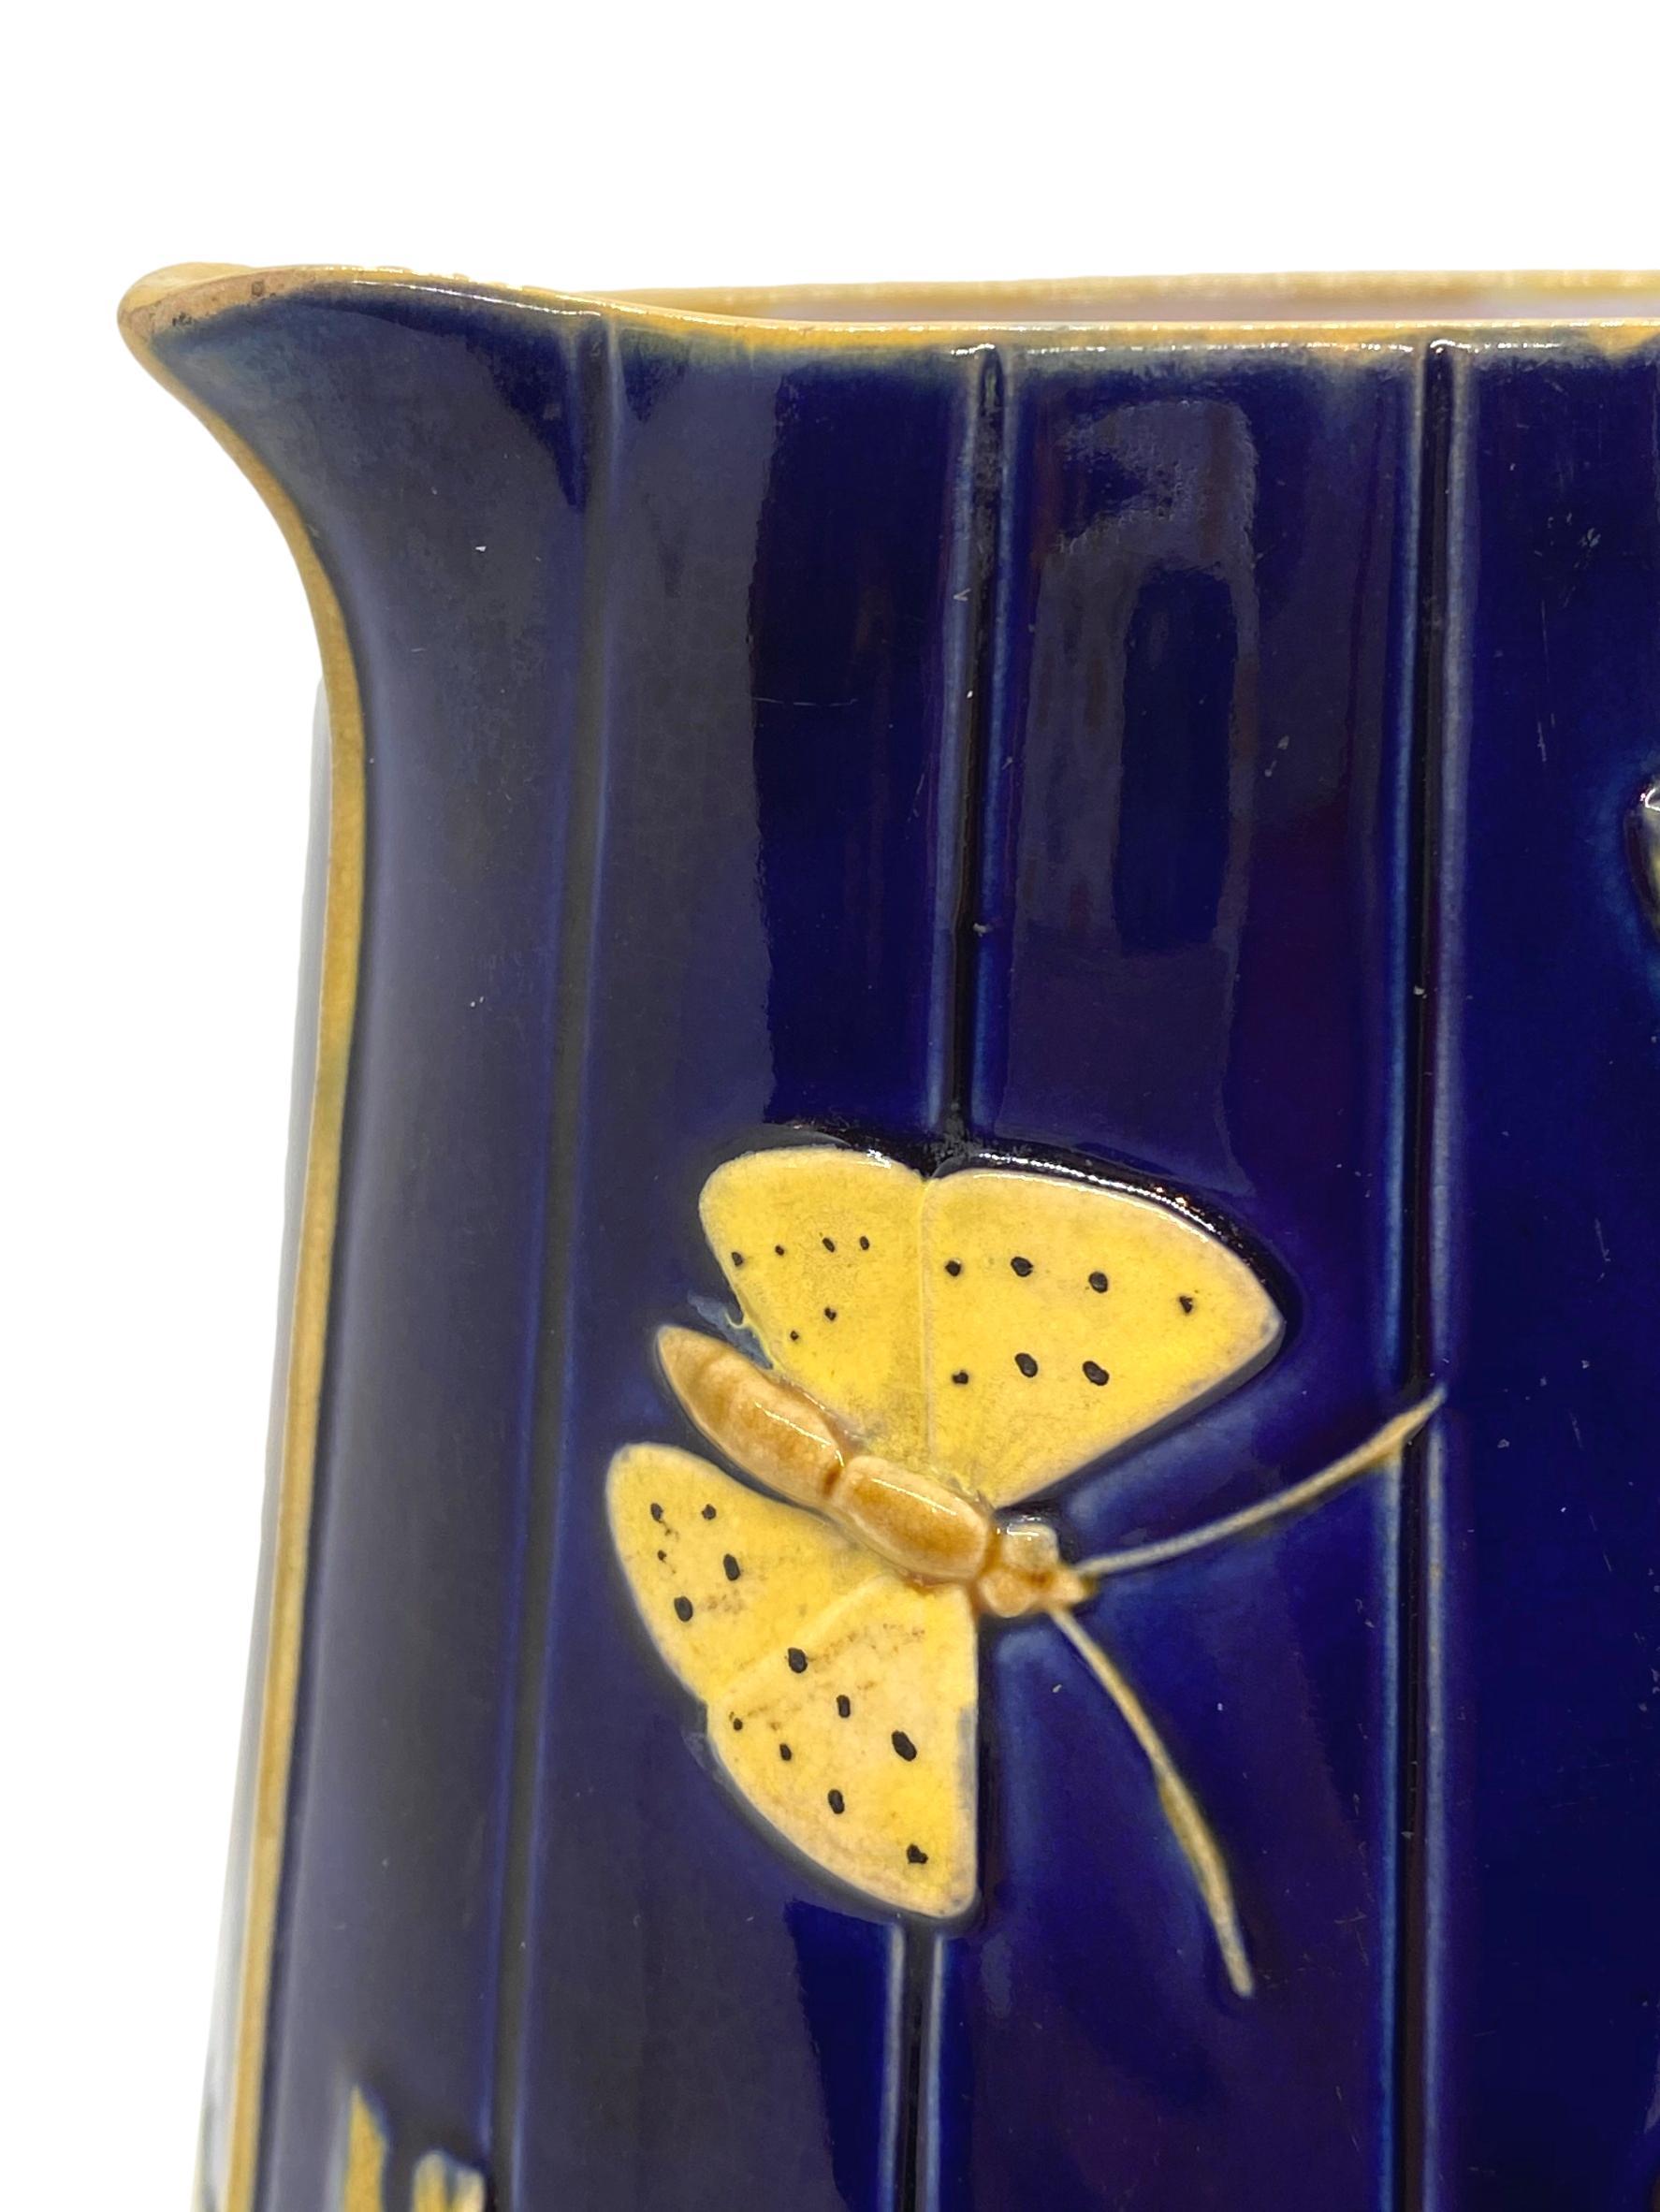 Molded Brown-Westhead Moore Majolica Butterfly and Basketweave Pitcher, Cobalt, c. 1873